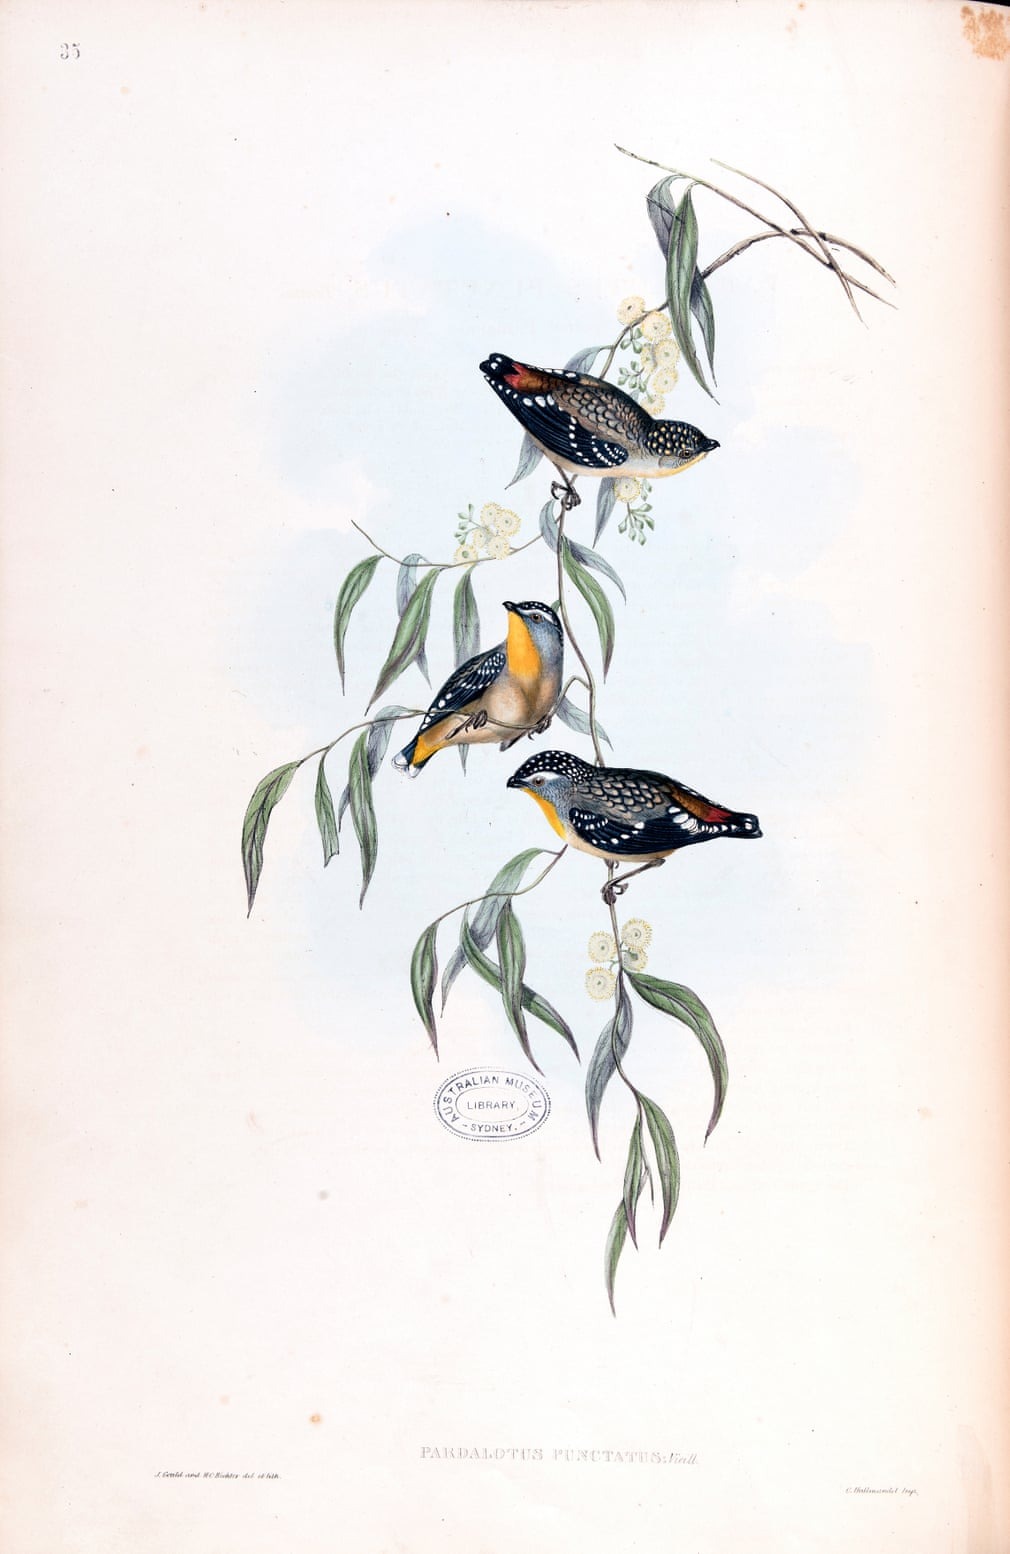 Birds Of Australia, Fascinating Illustrations From The 19th Century By Elizabeth Gould (7)